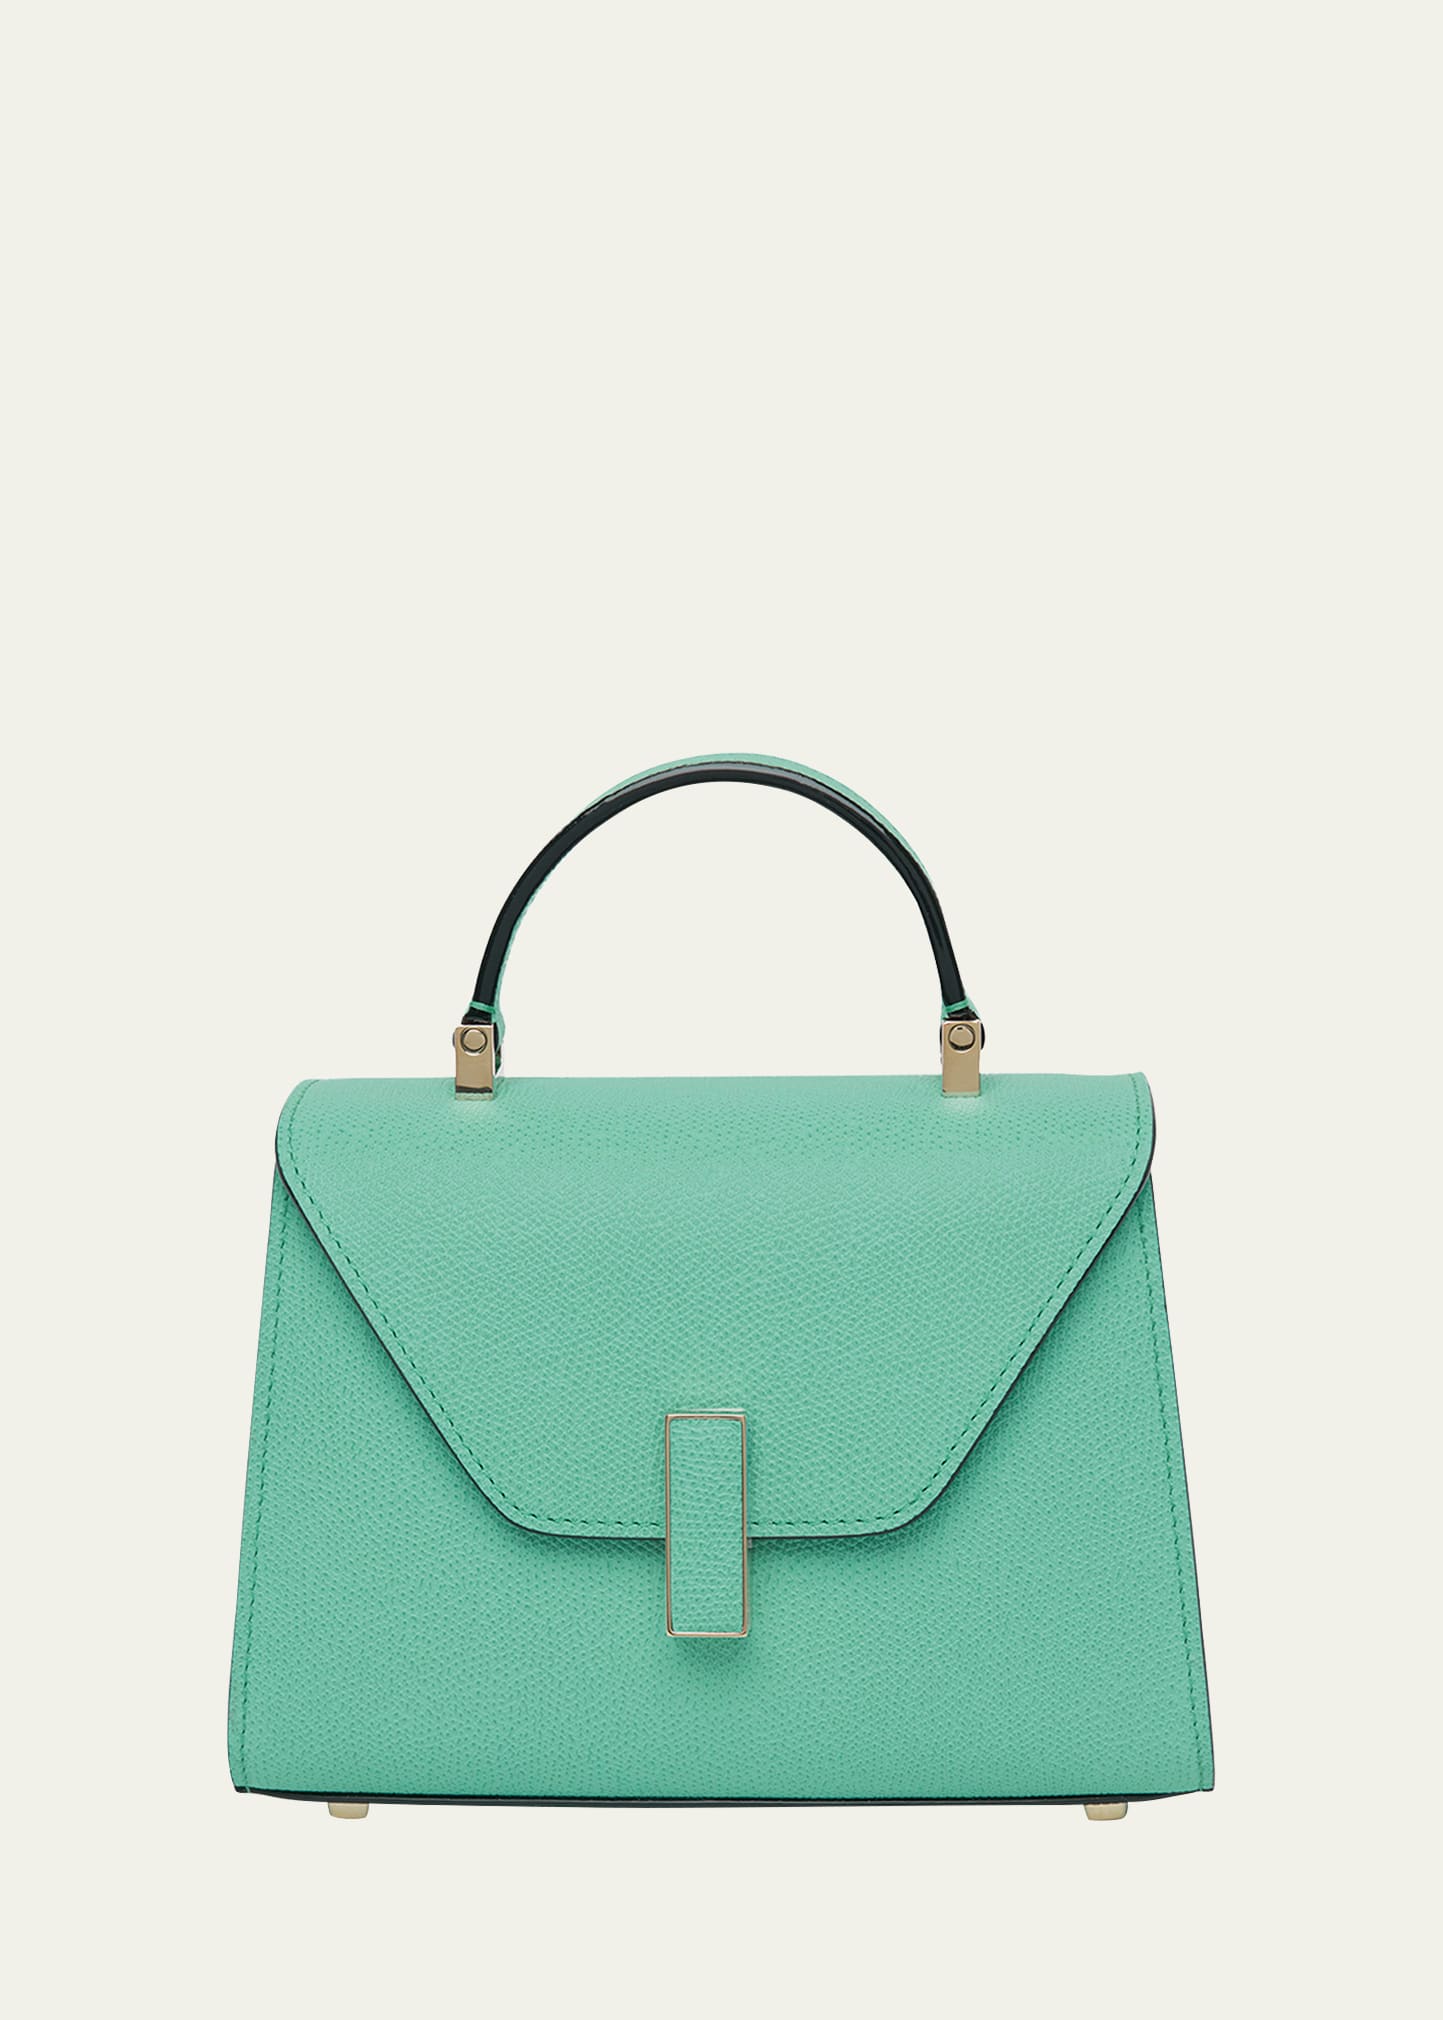 Valextra Iside Xs Leather Top-handle Bag In Vlm Latte Menta